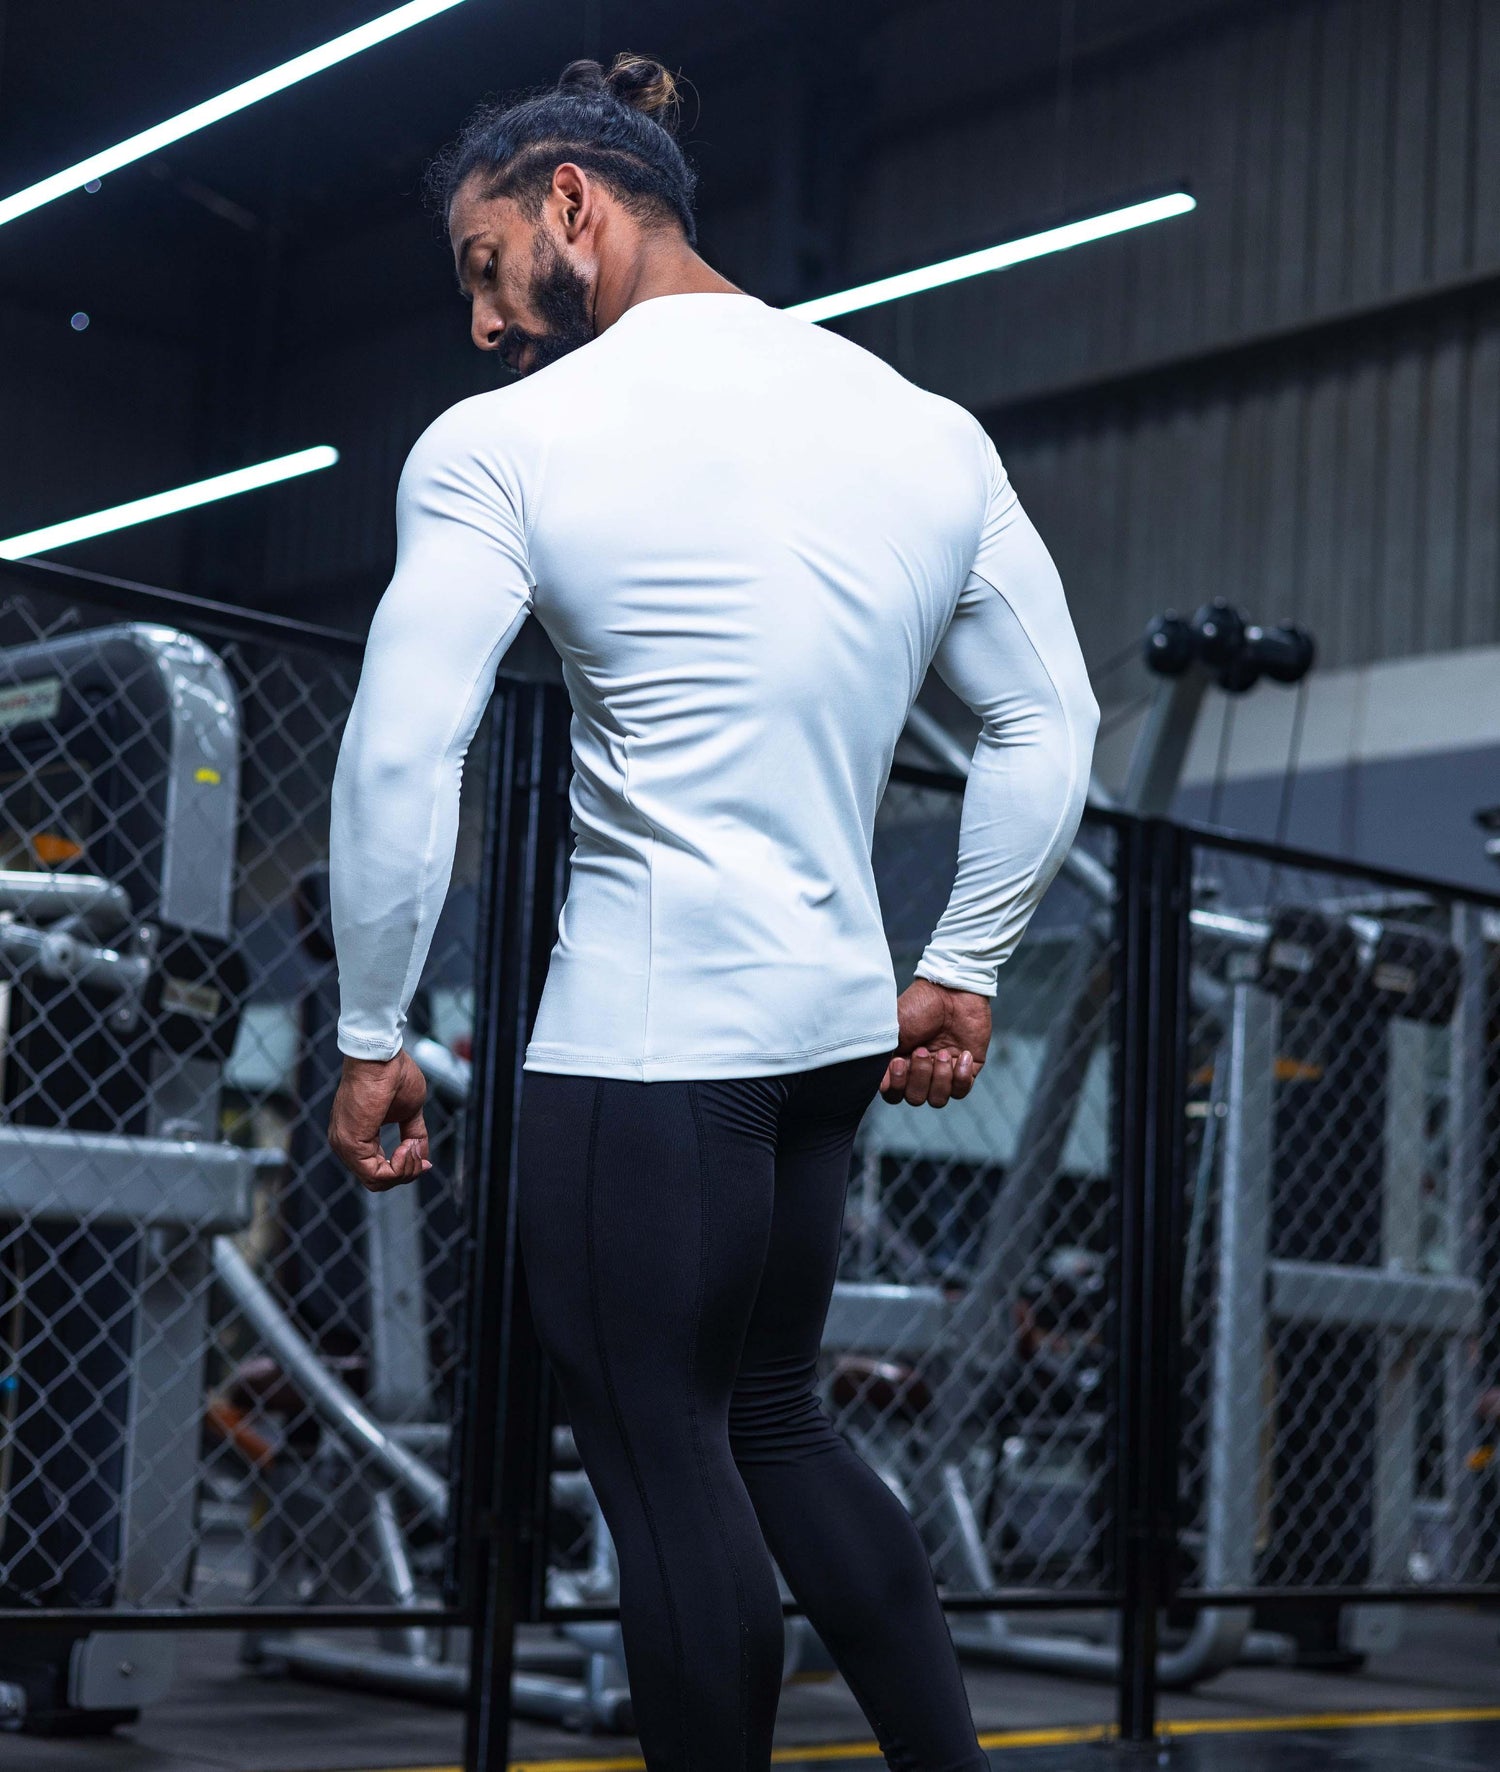 Compression GymX Full SleeveTee: Perfect White - GymX